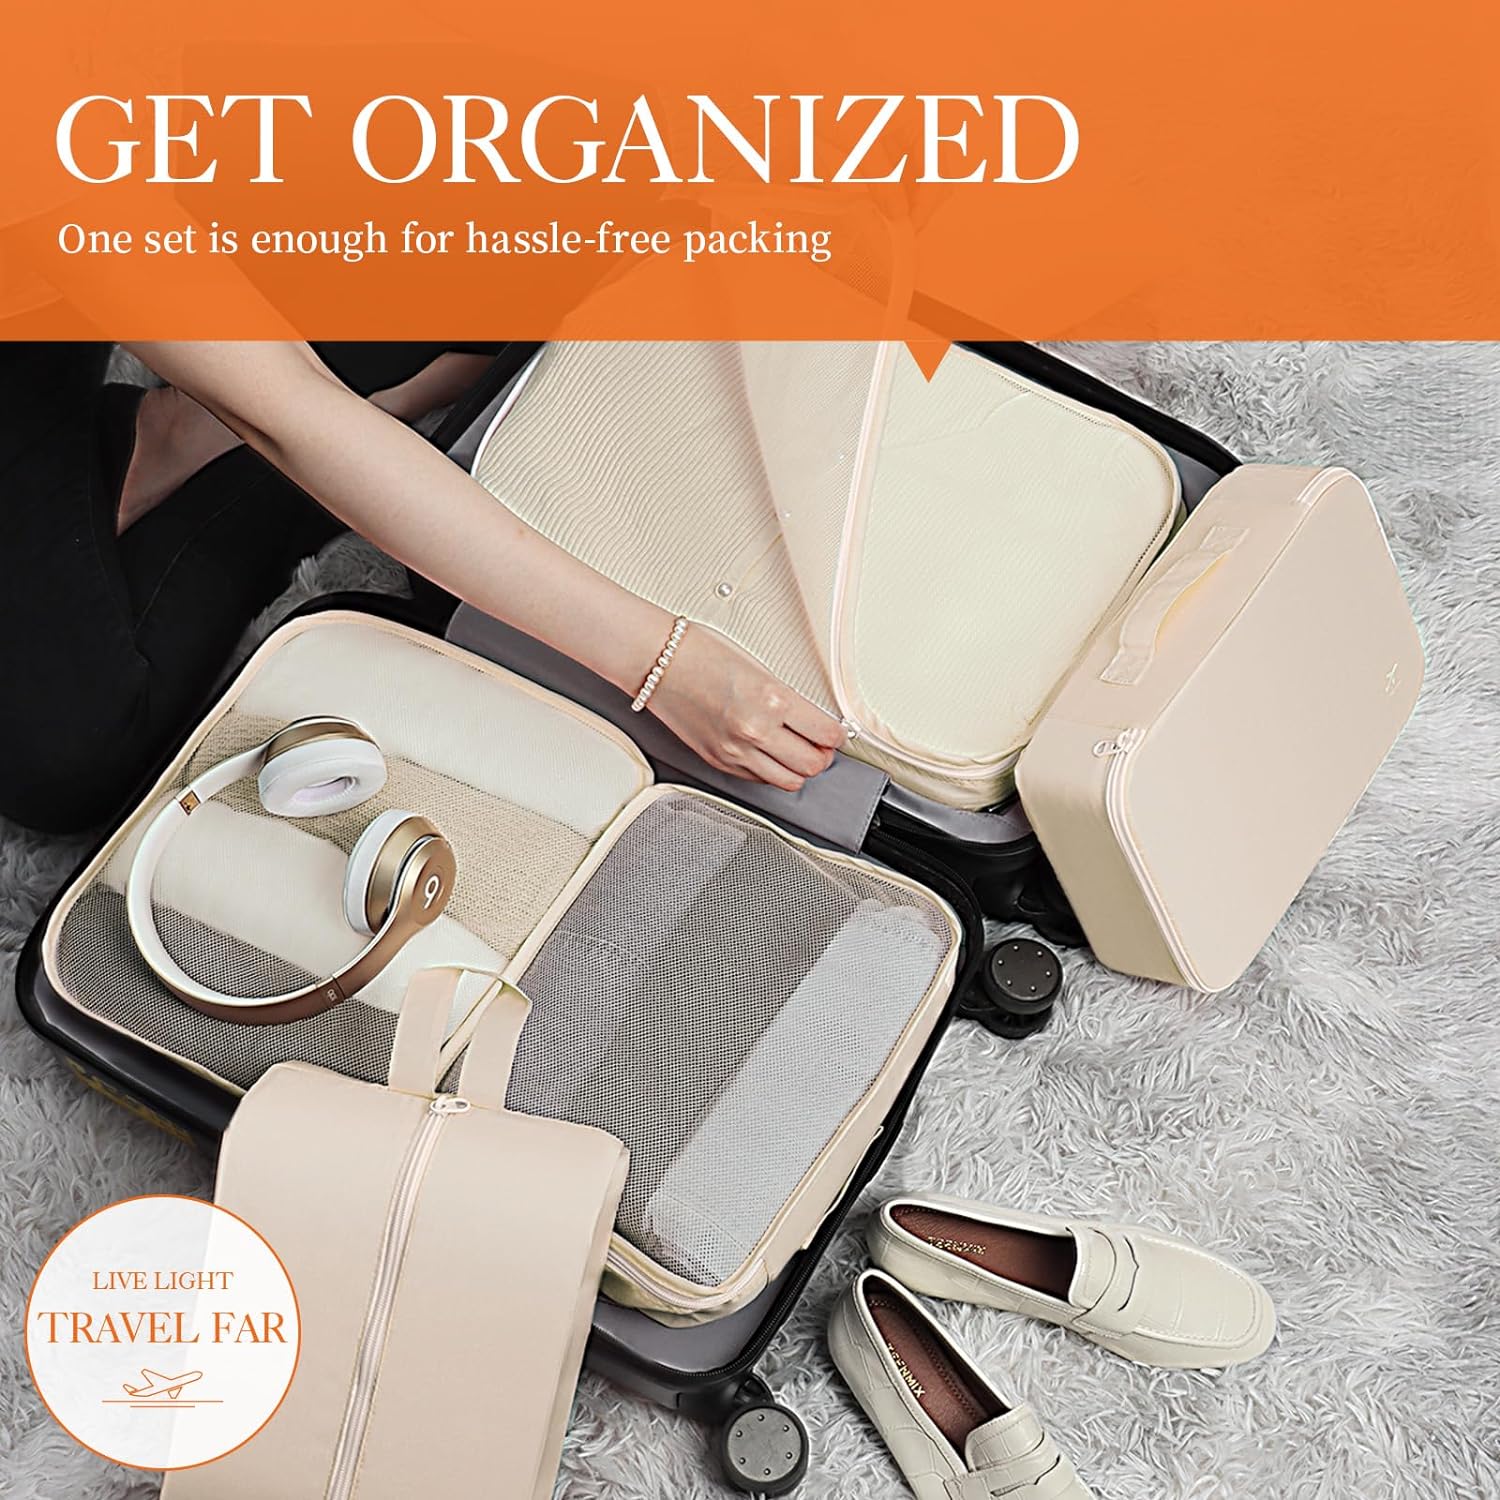 HOTOR Packing Cubes for Suitcases - 6 Pieces, Light Packing Cubes for Travel, Premium Suitcase Organizer Bags Set, Space-Saving Luggage Organizers for Suitcase, Water-Resistant Travel Essentials,Beige